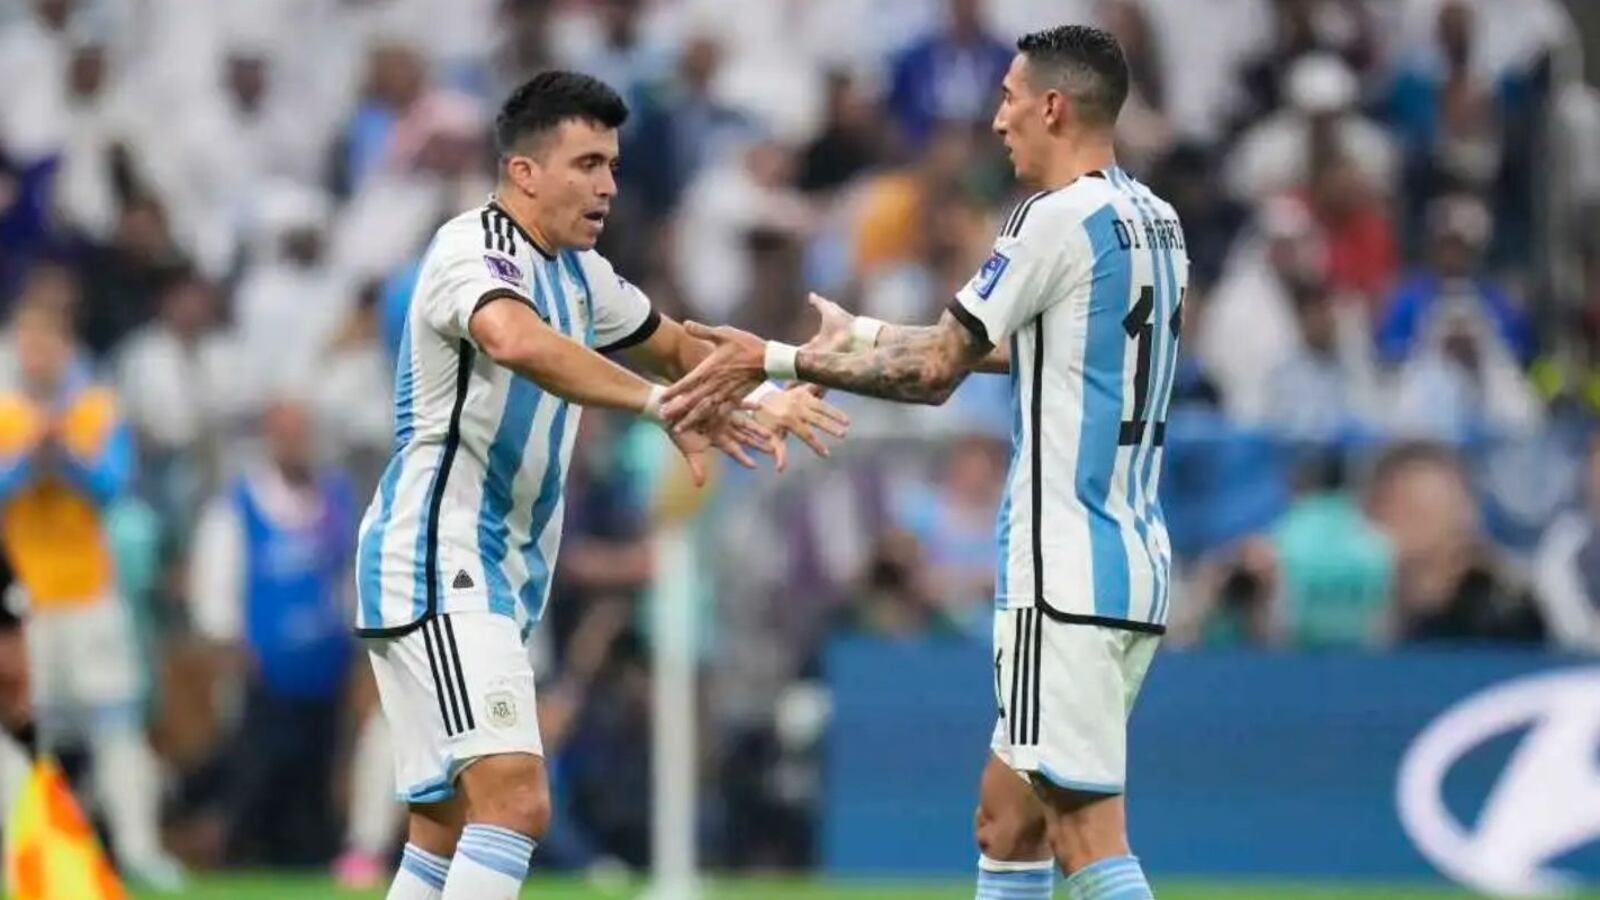 Di María's revelation about his exit in the World Cup final after 10 months